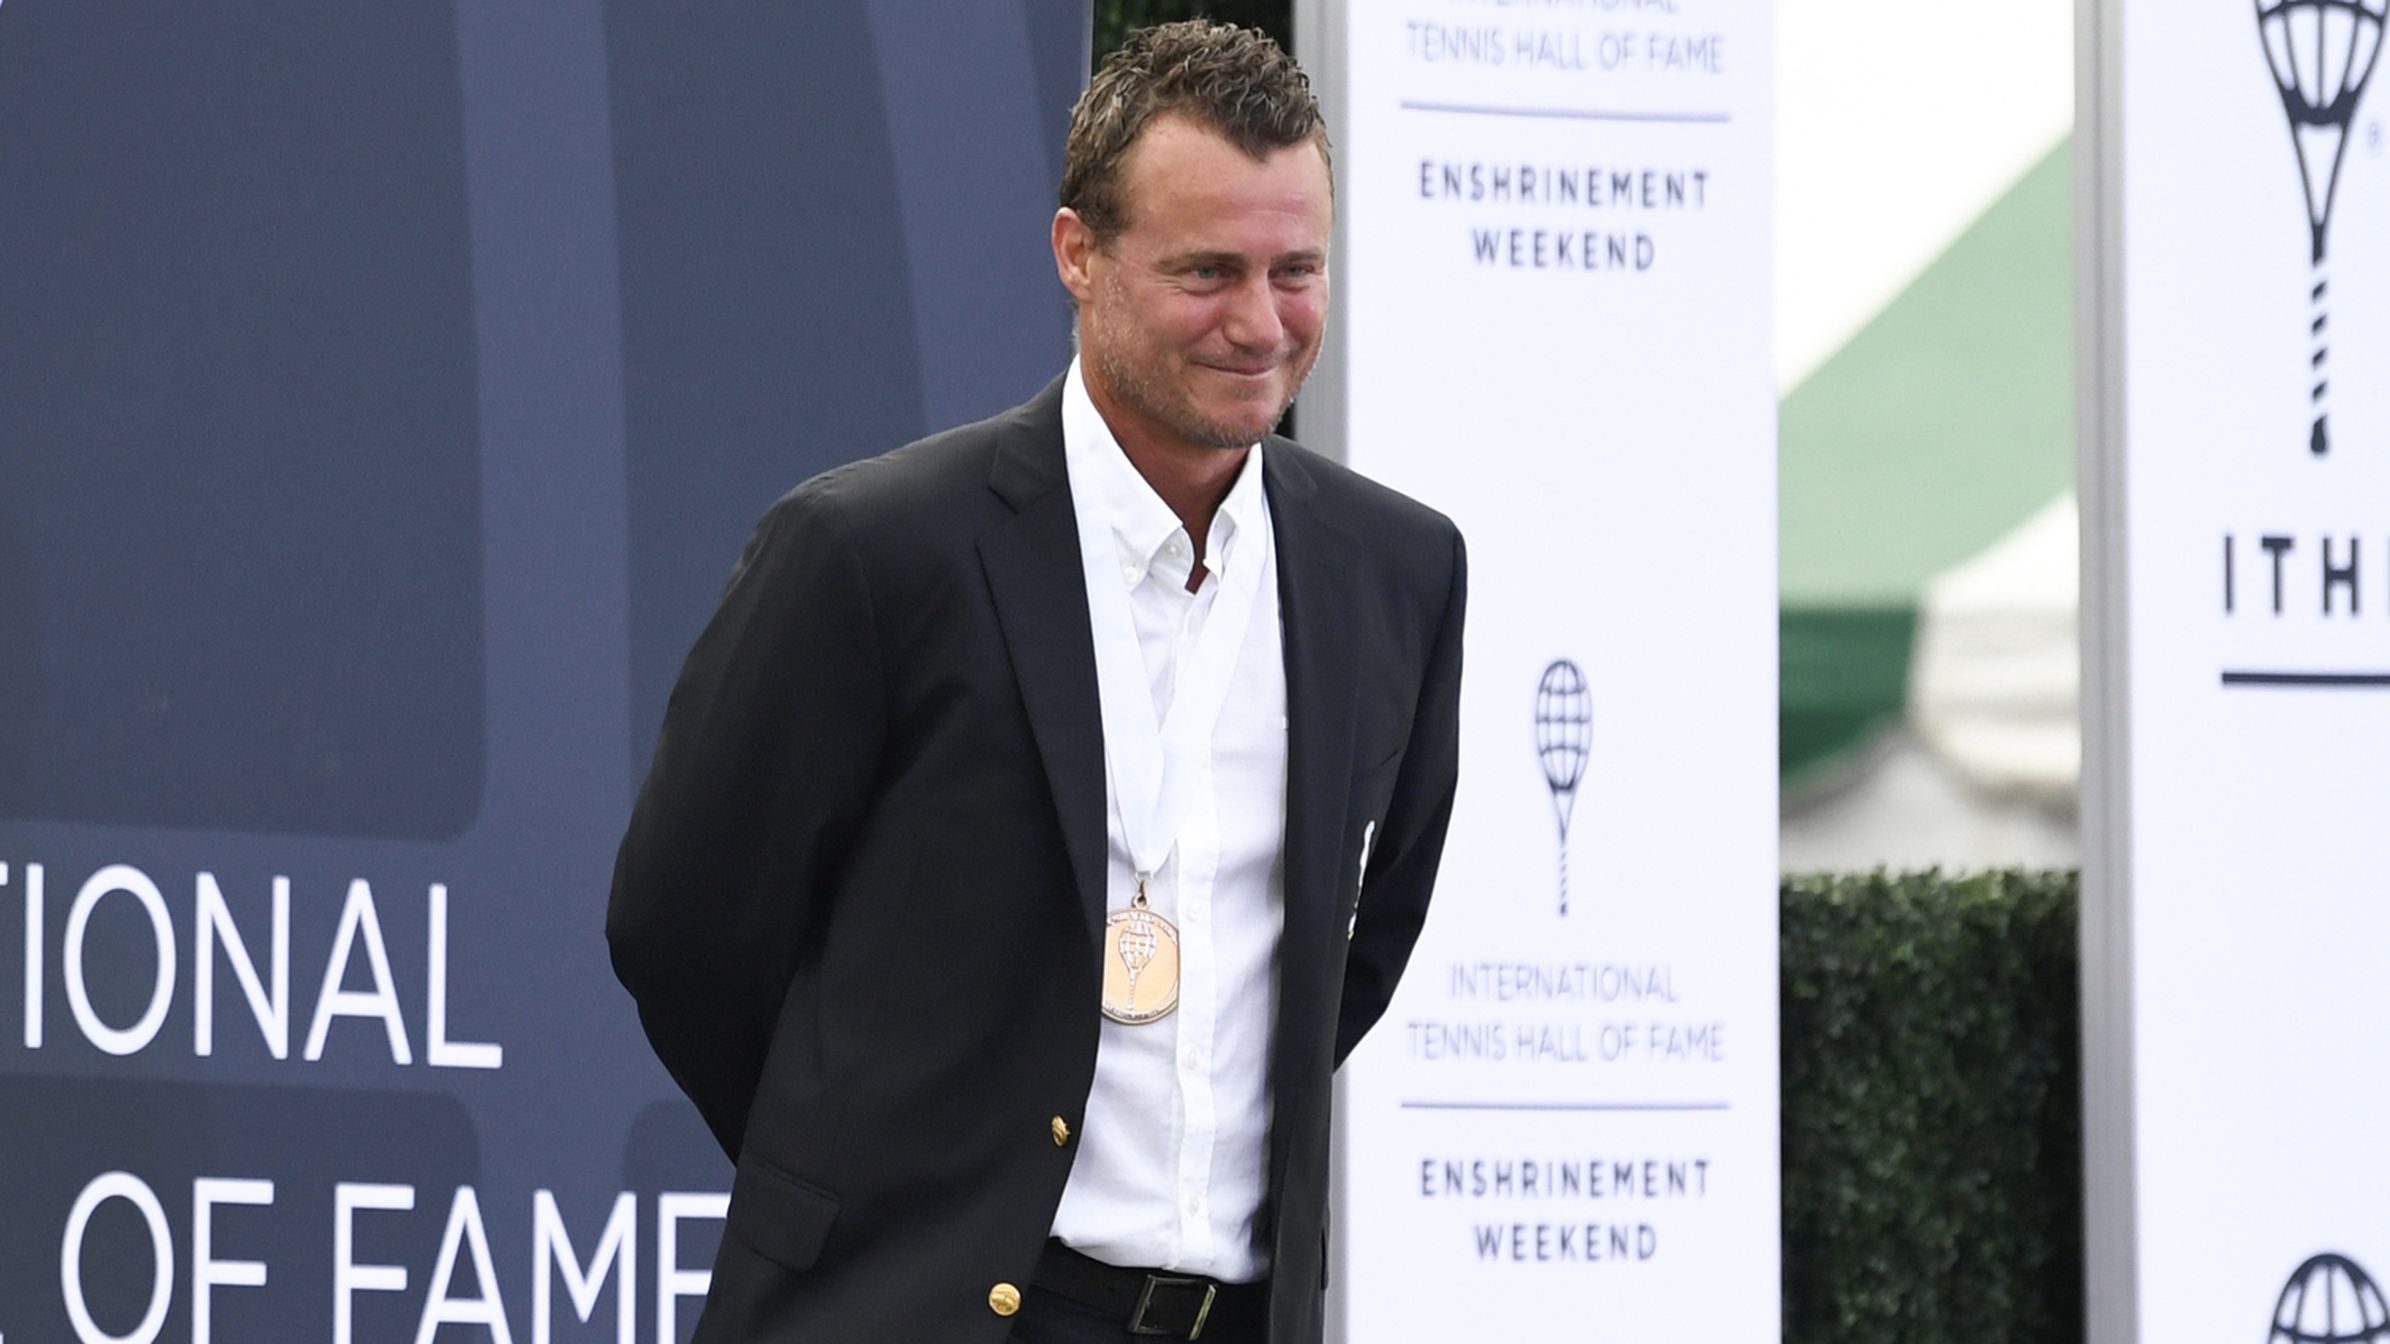 Lleyton Hewitt stands on stage during the International Tennis Hall of Fame 2022 Induction Ceremony.